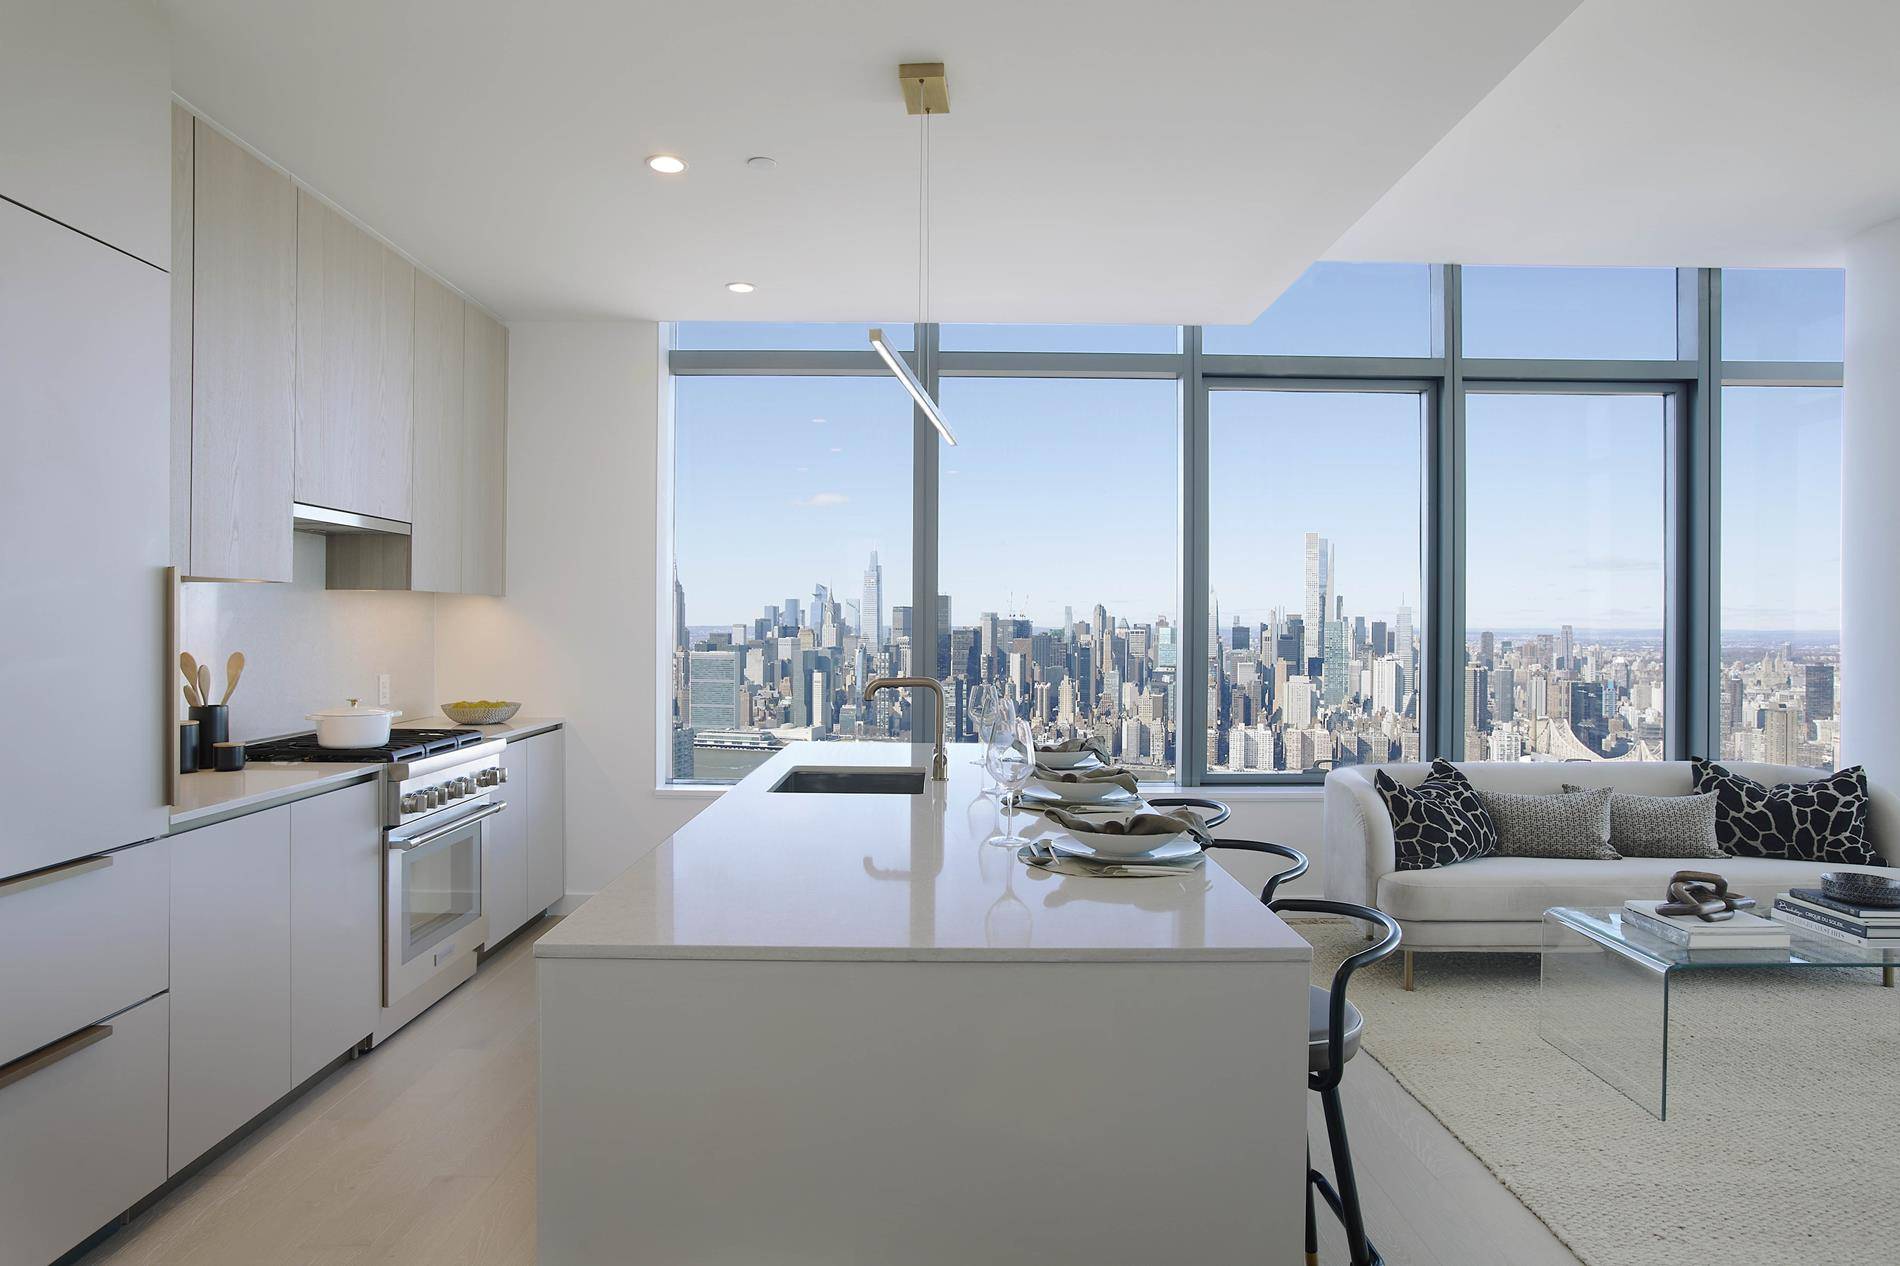 Welcome to Skyline Tower, the tallest condominium building in Queens.